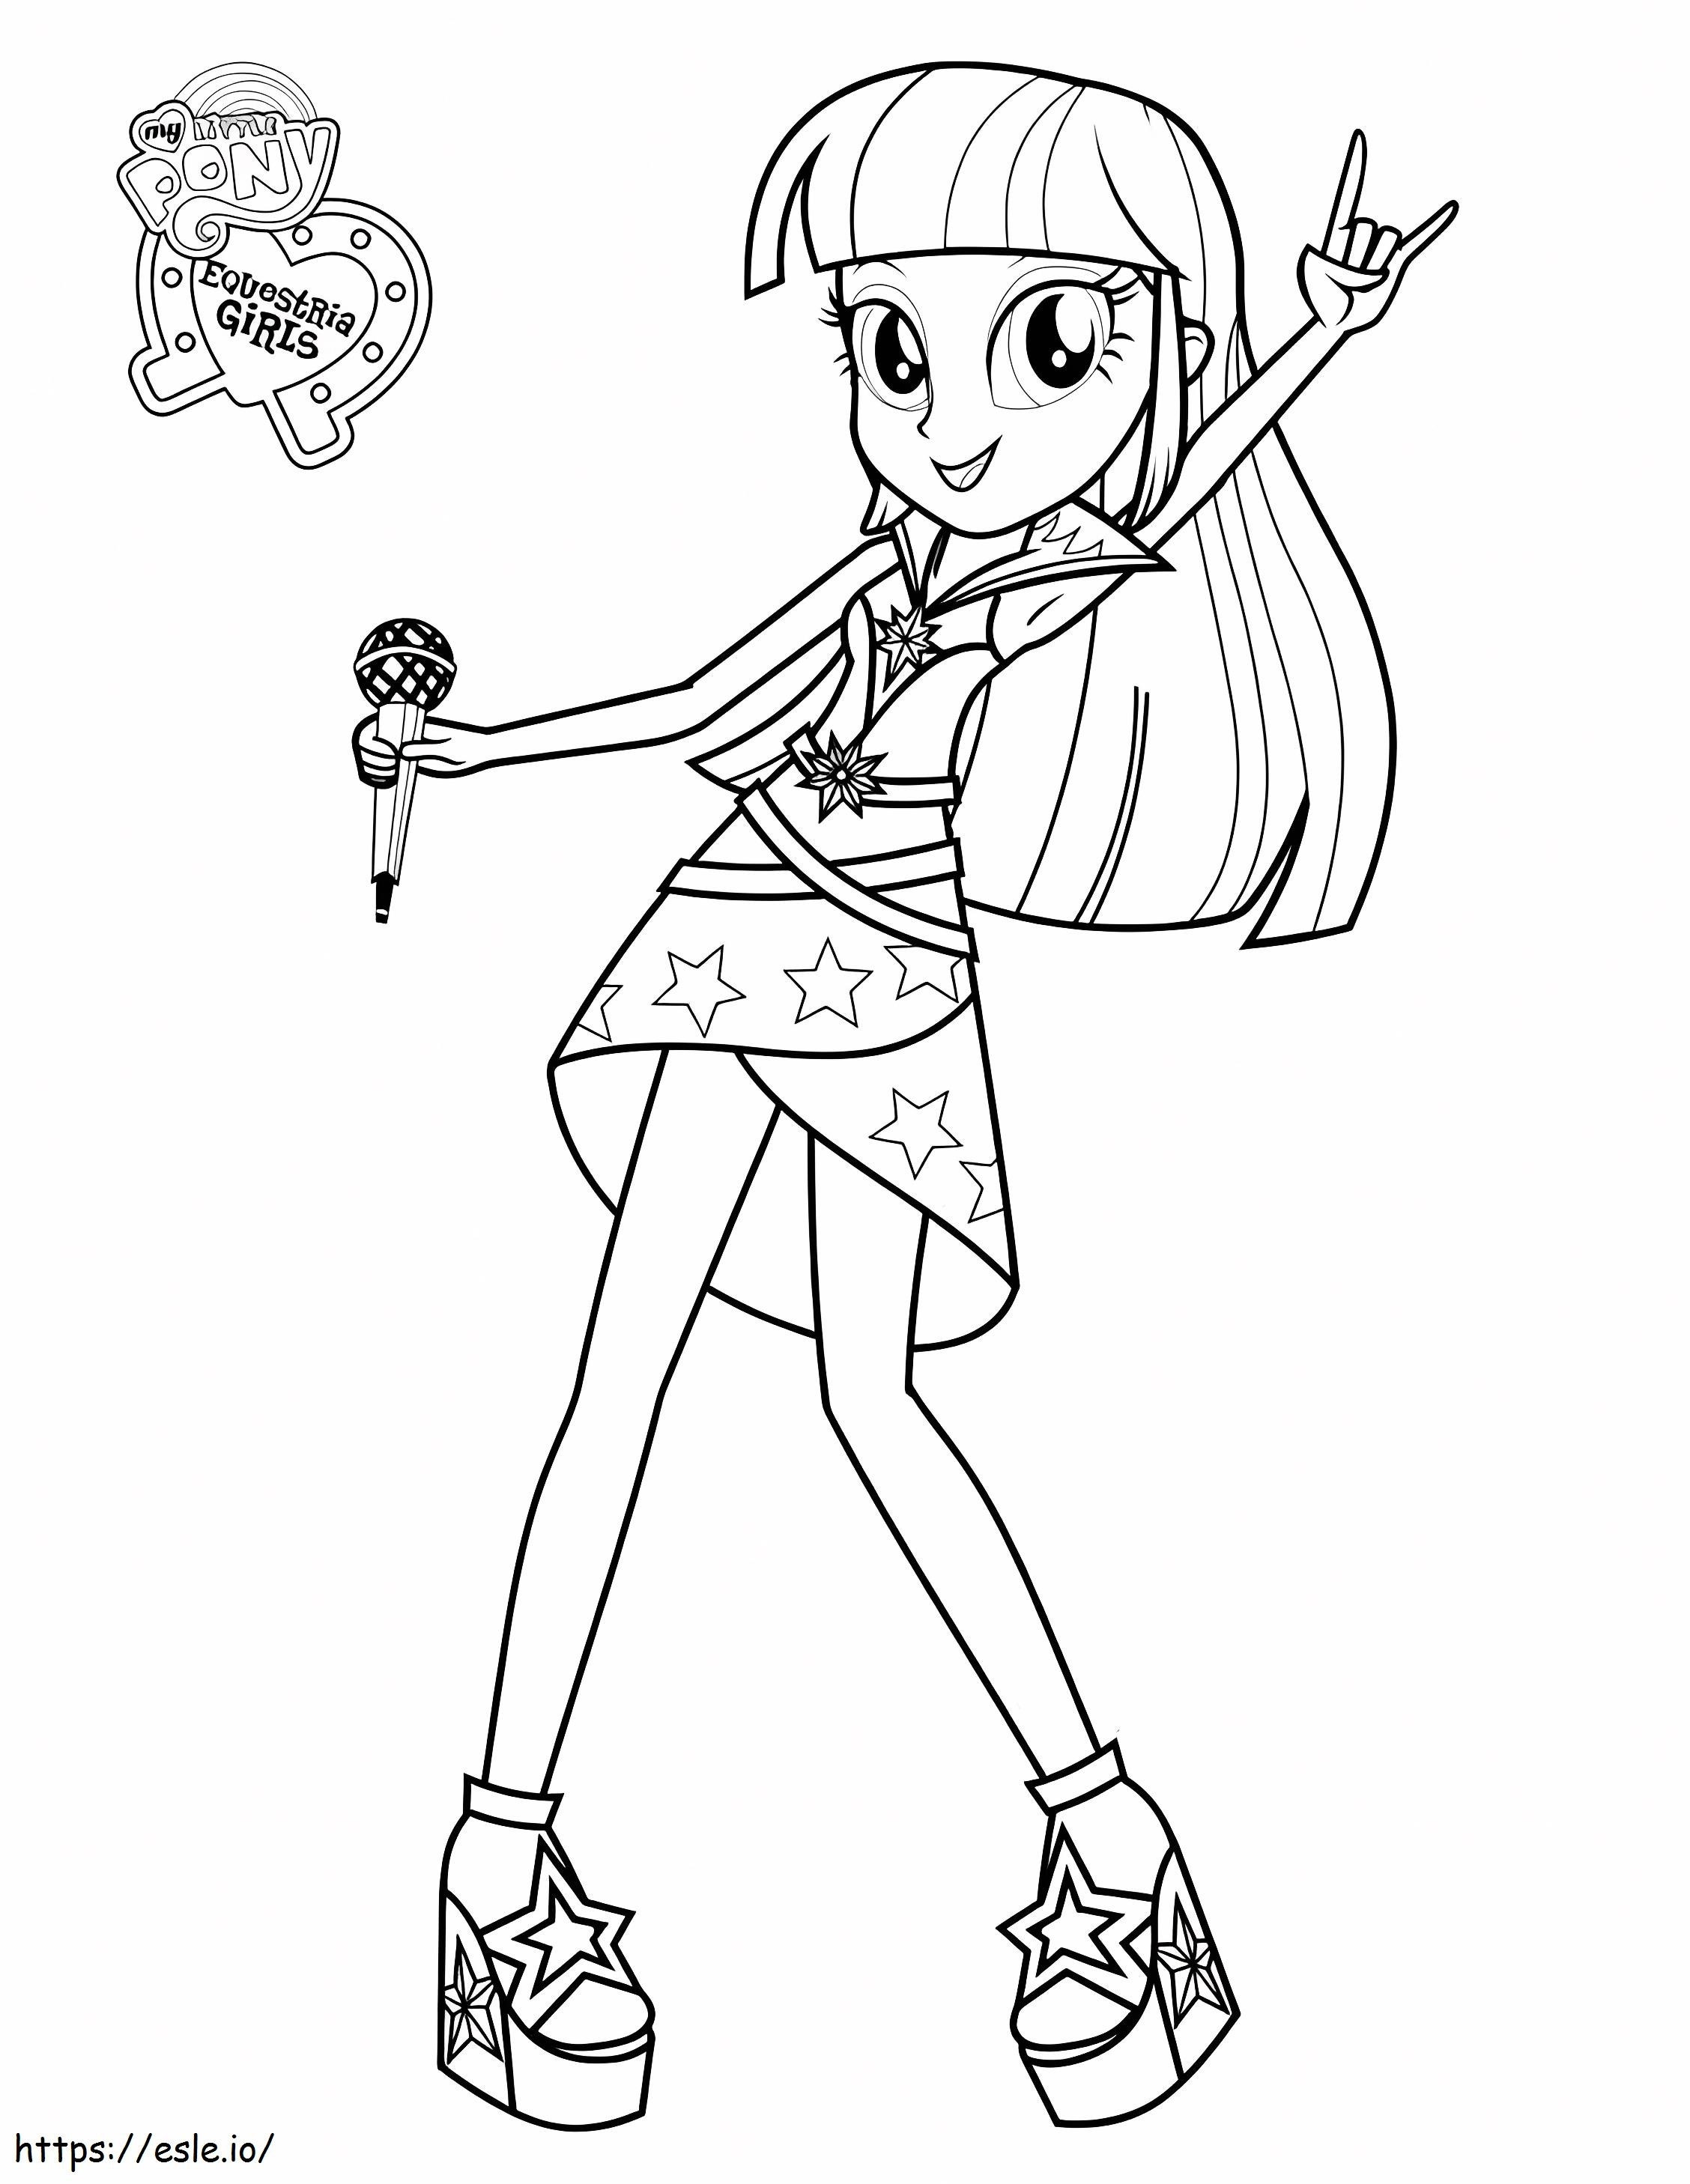 1535165597 Twilight Sparkle Singing A4 coloring page